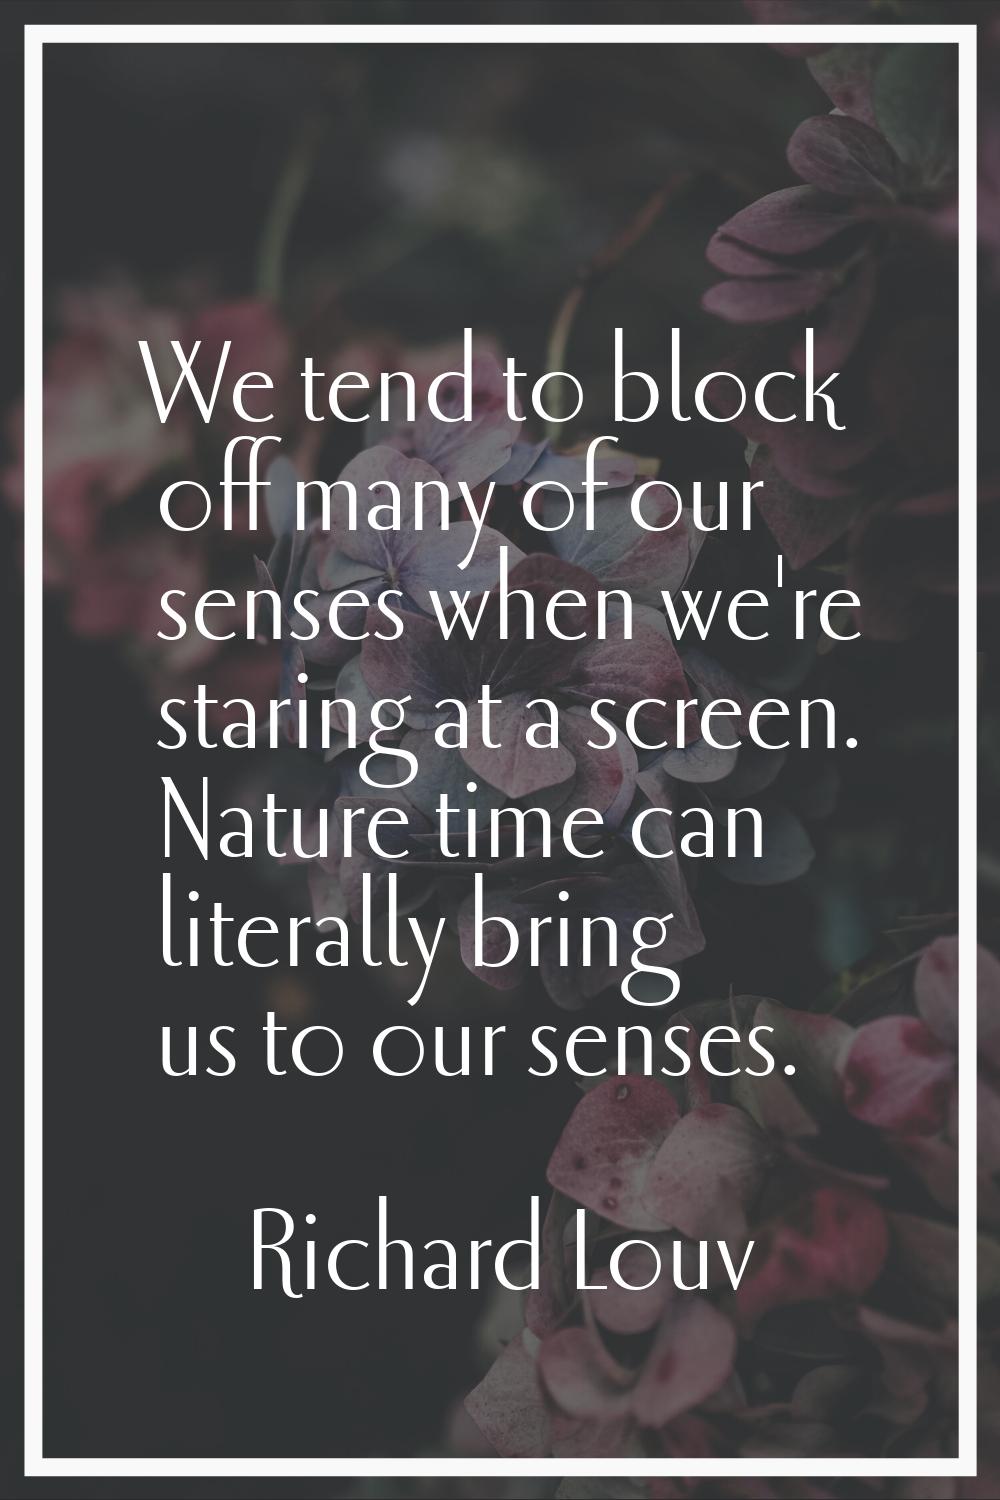 We tend to block off many of our senses when we're staring at a screen. Nature time can literally b